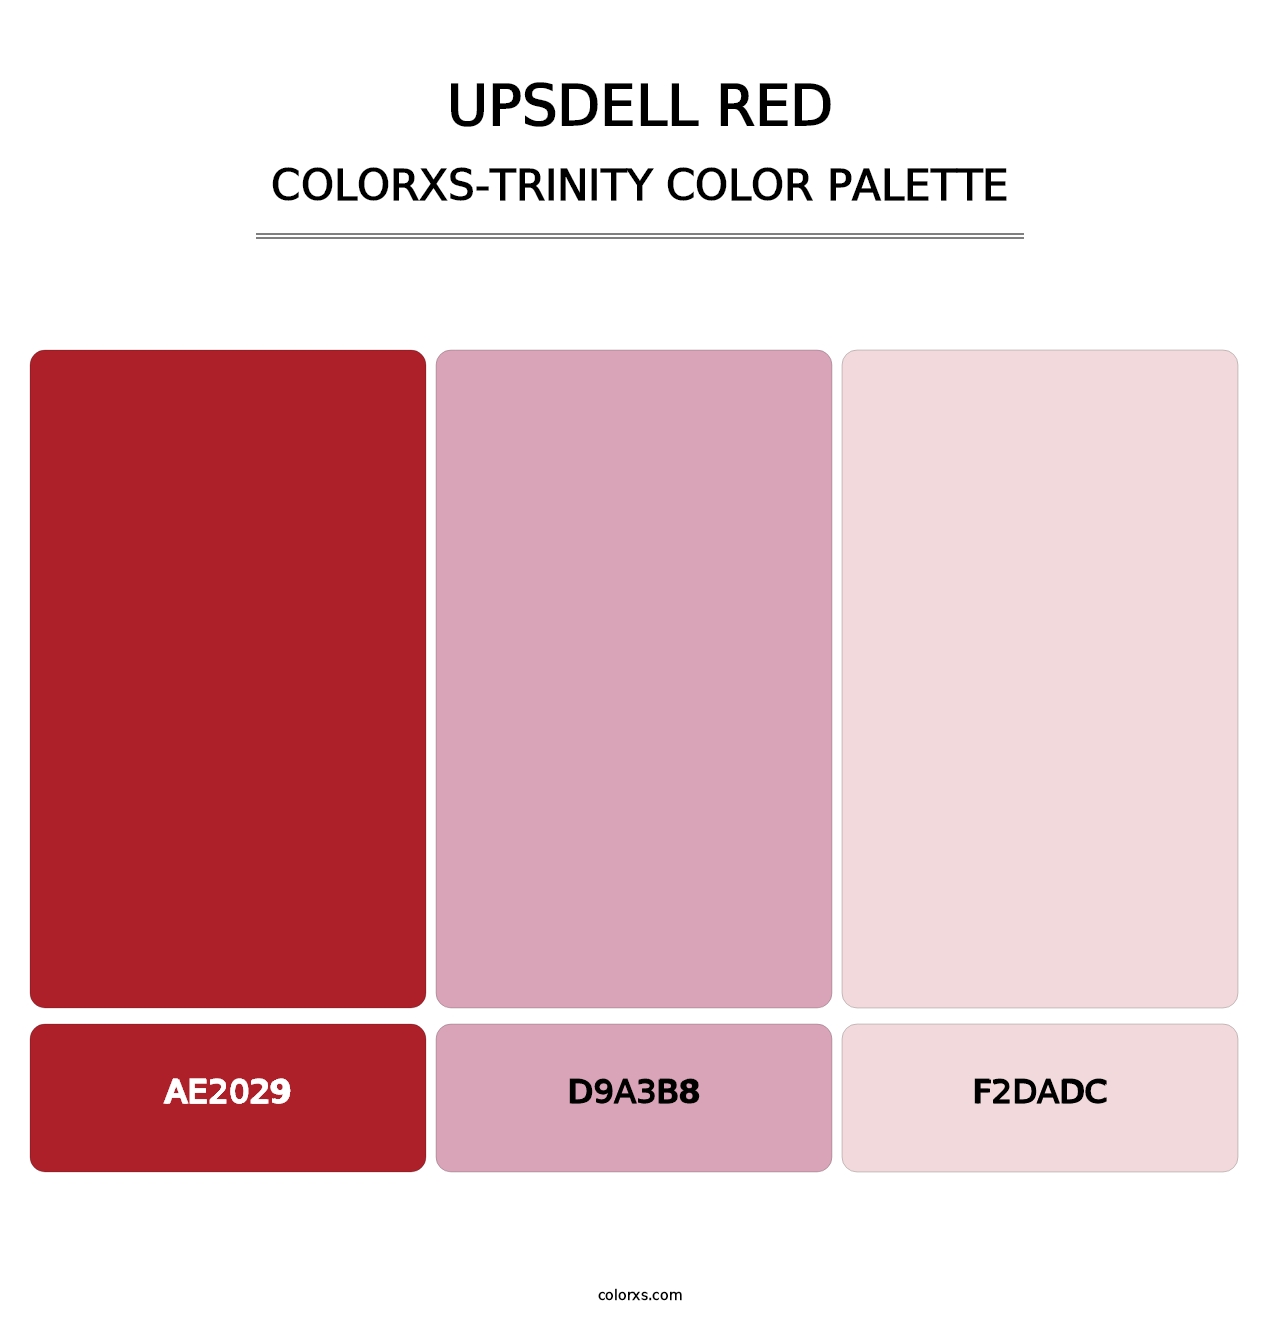 Upsdell Red - Colorxs Trinity Palette